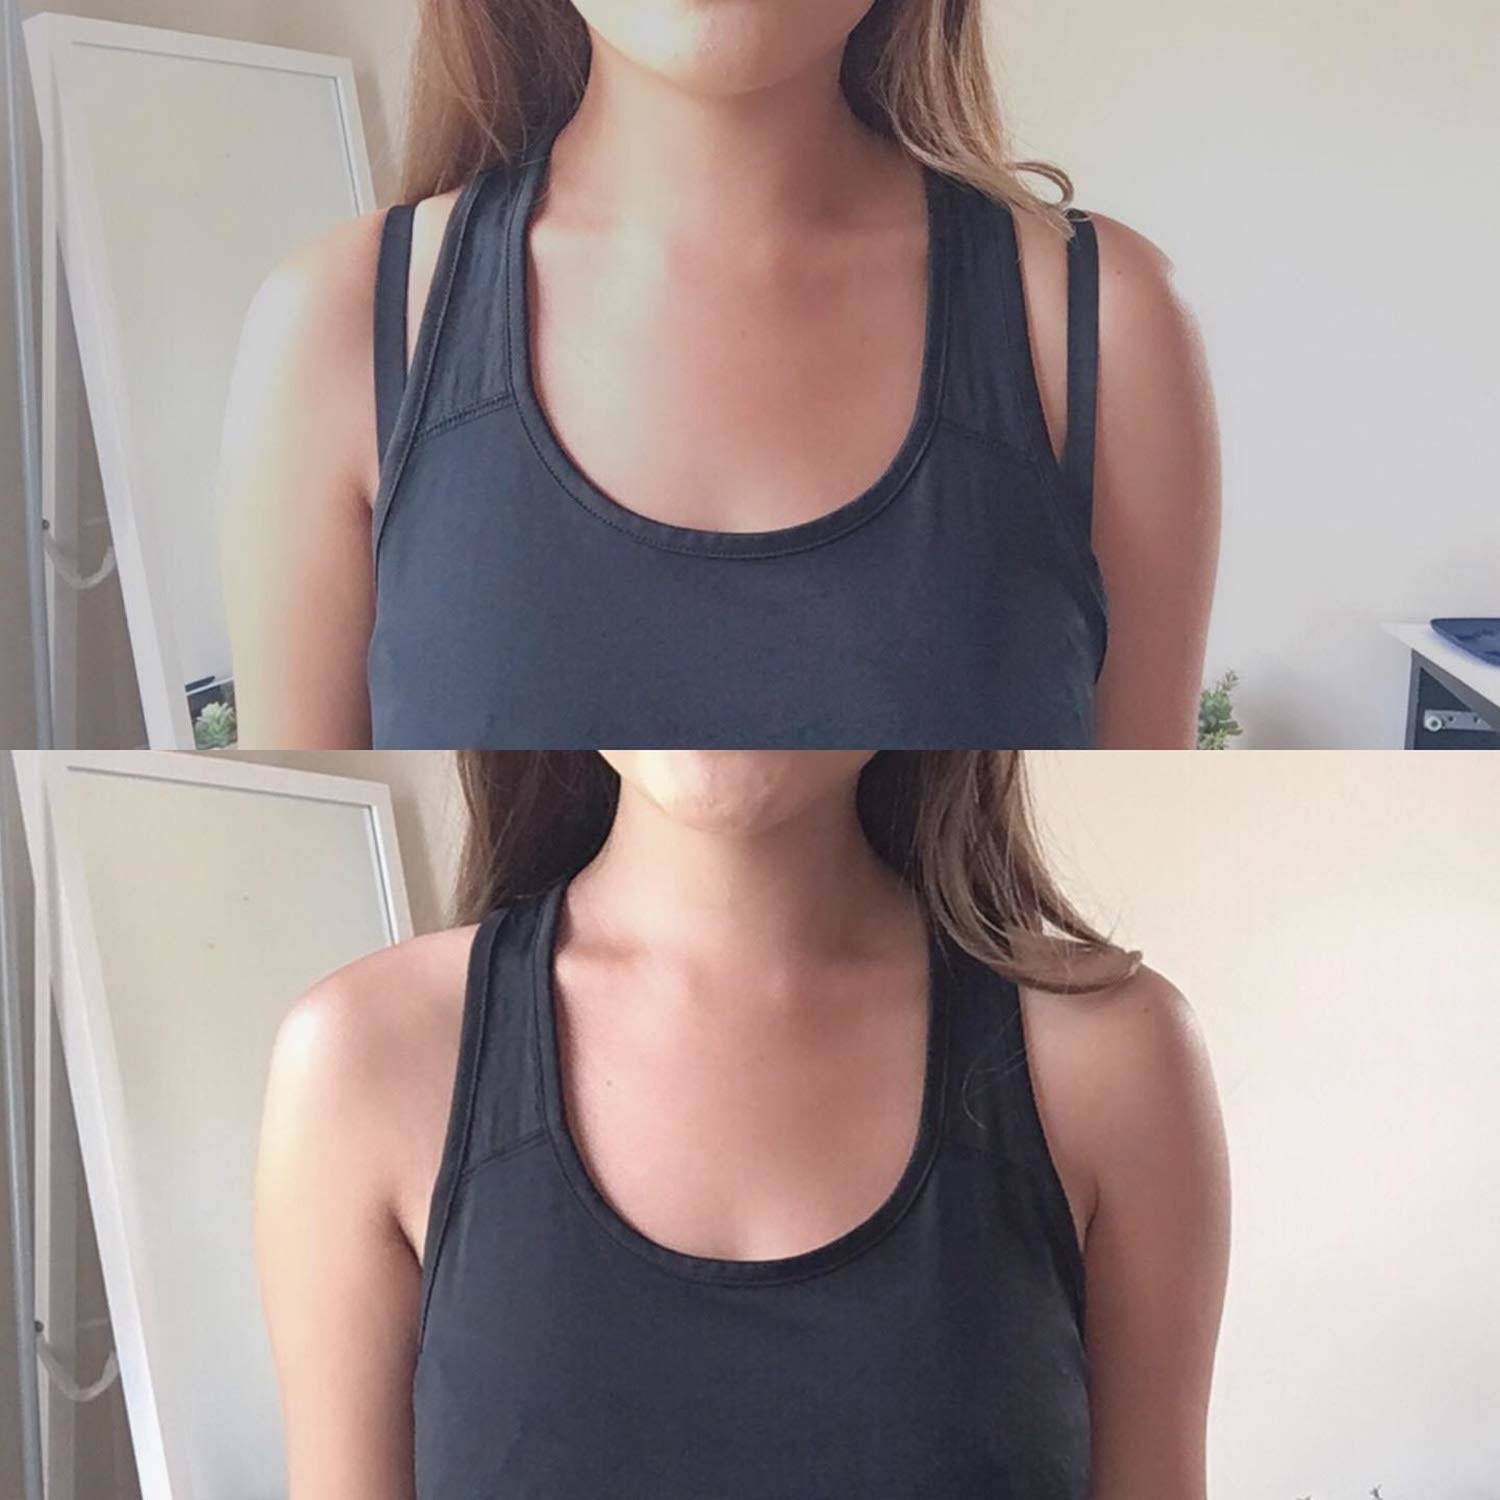 before and after photo of model wearing racerback top with bra straps showing; then racerback top with no bra straps showing